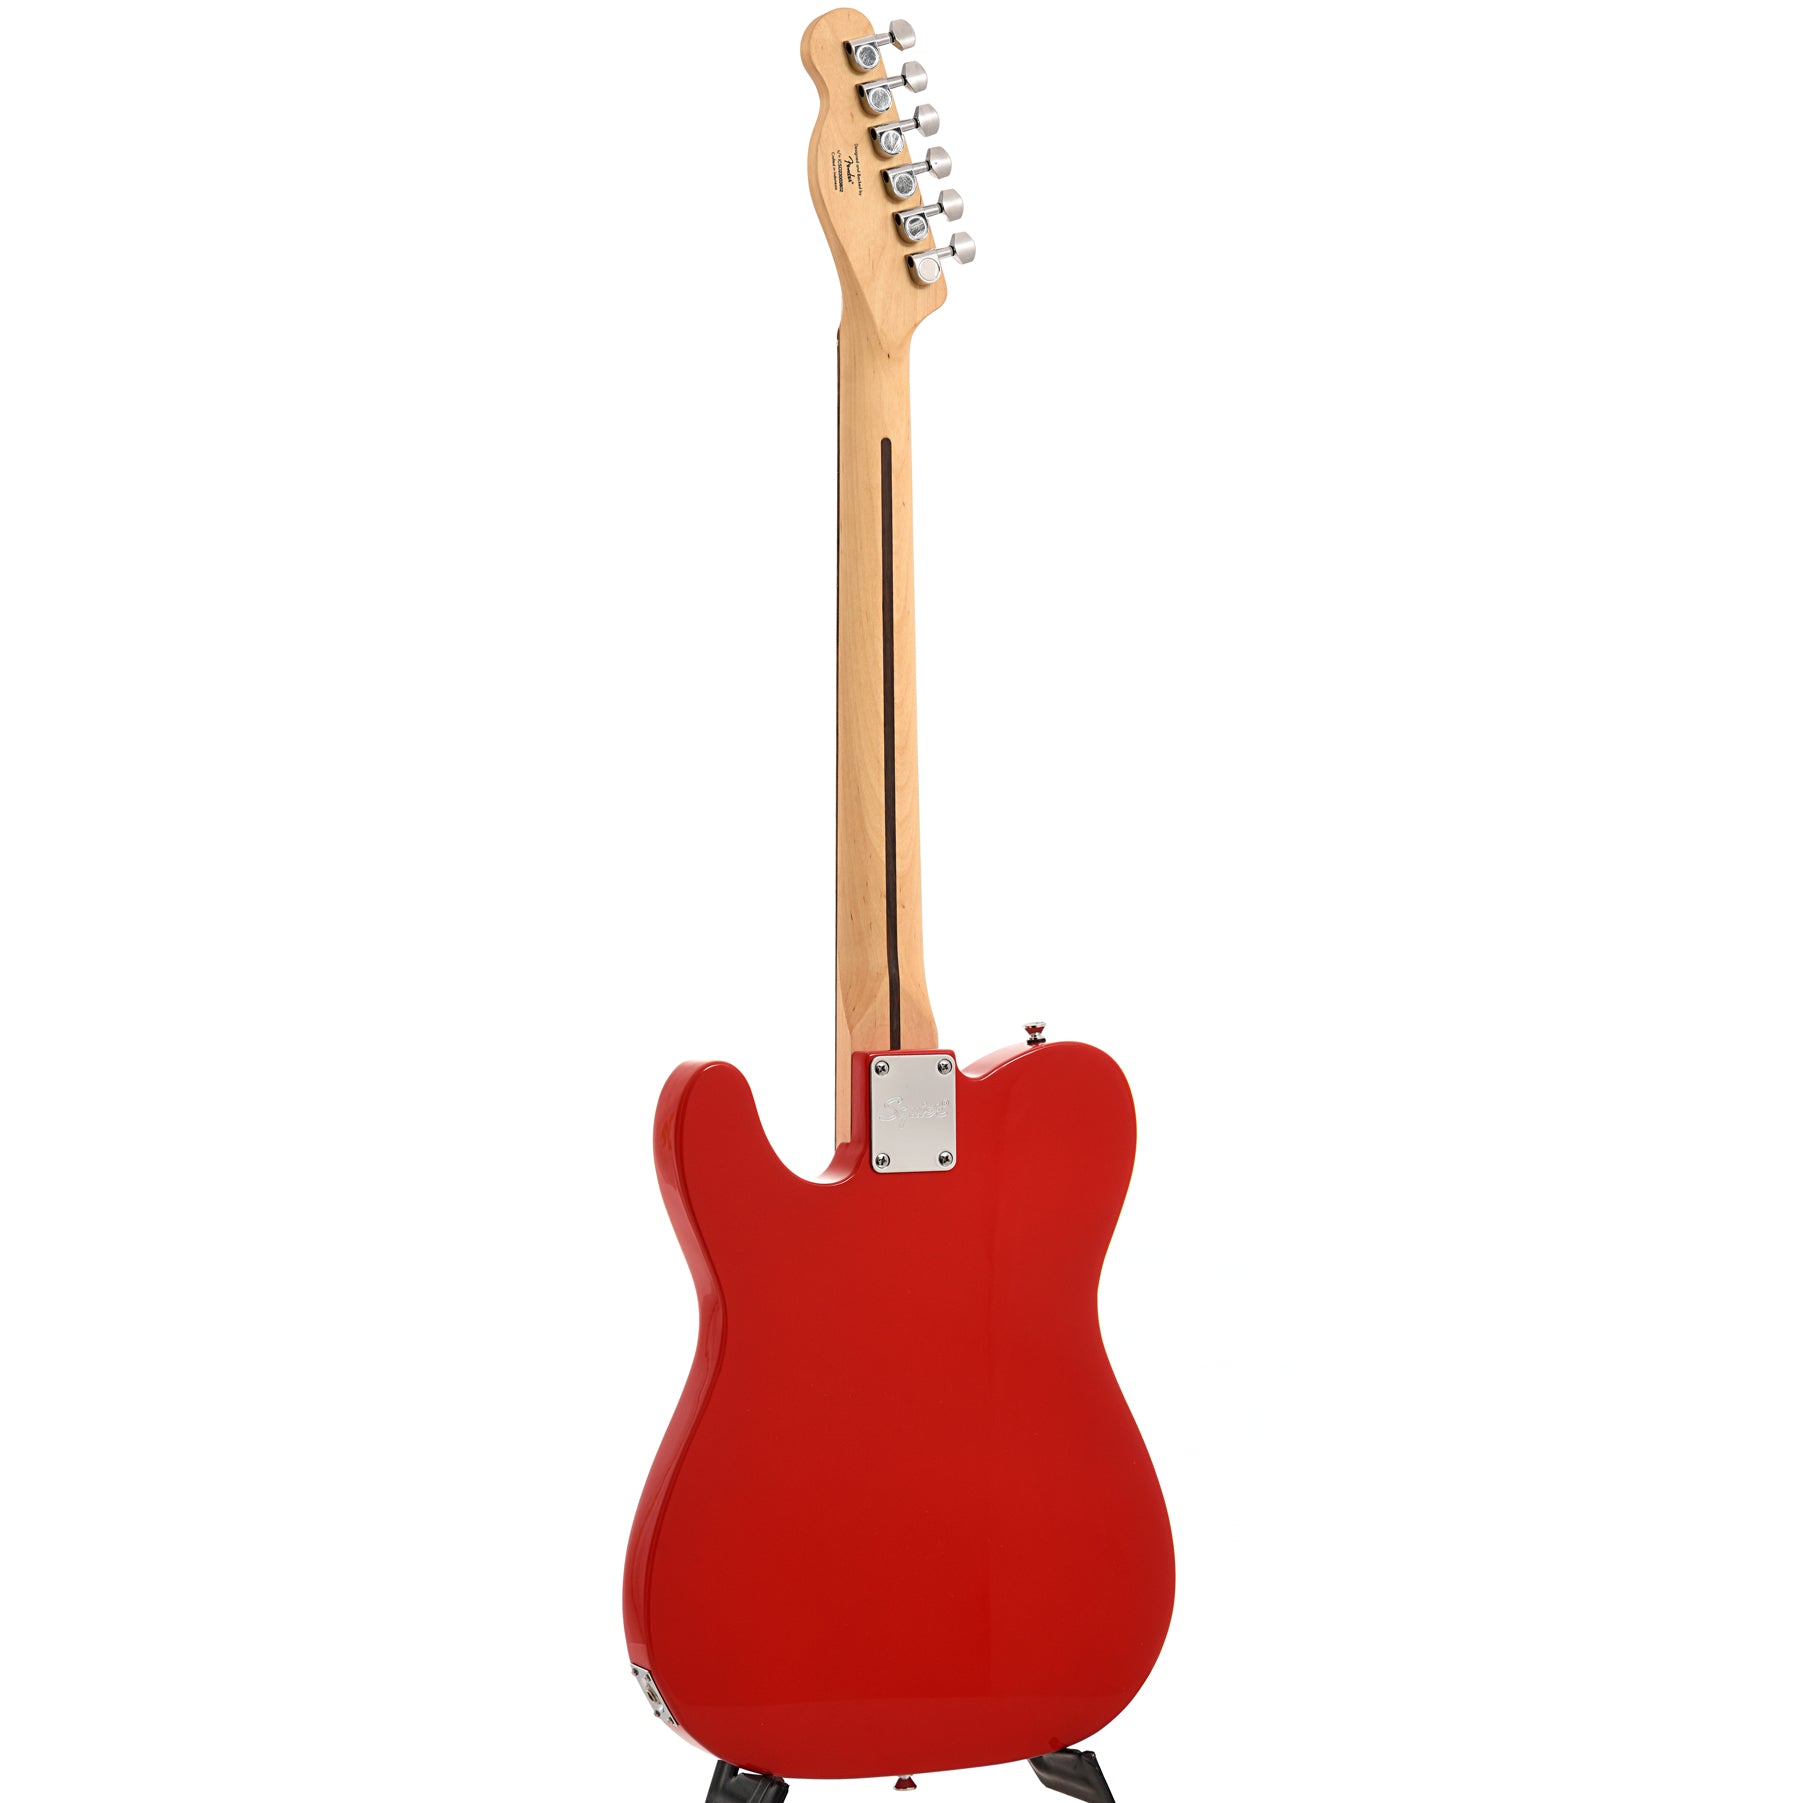 Full back and side of Squier Sonic Telecaster, Torino Red